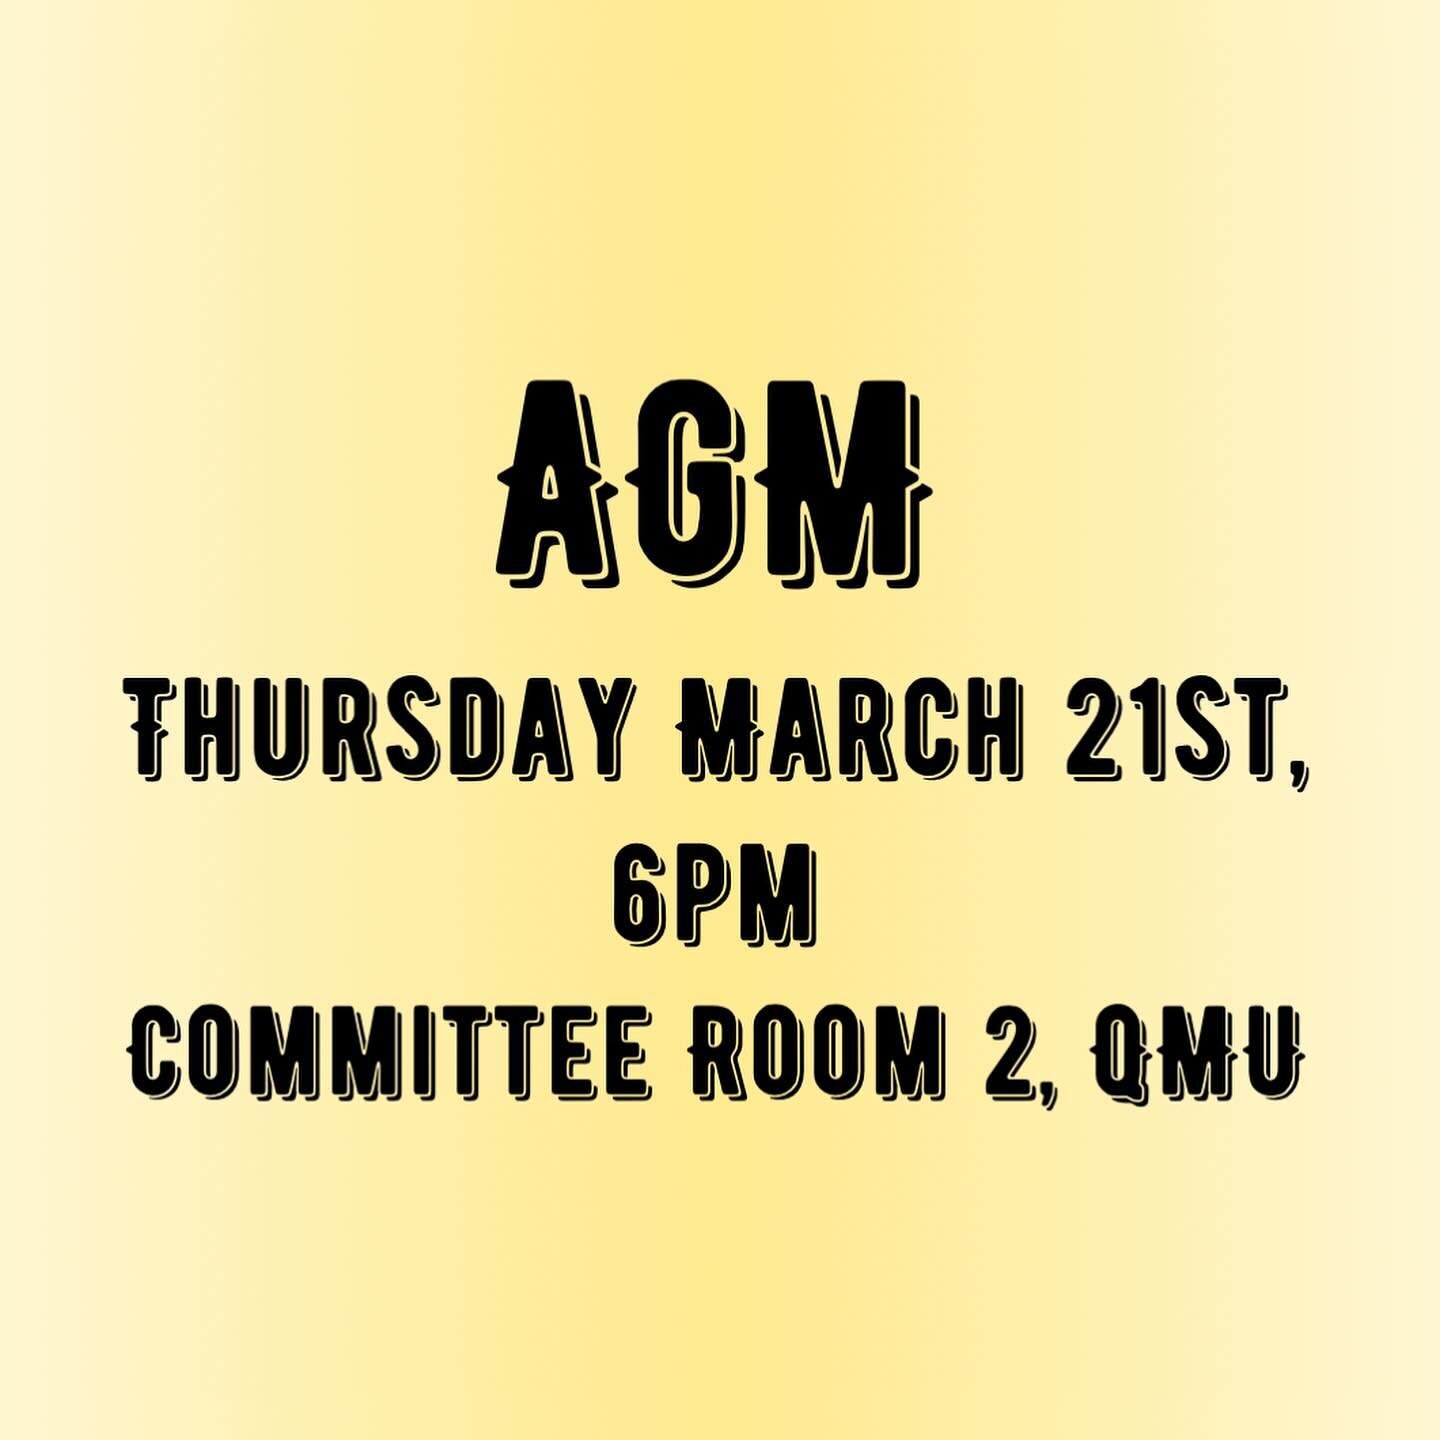 GURC AGM

Come along to our end of year AGM and get involved with the 24-25 committee! 🖤💛

We hope to see you all there,
Love GURC